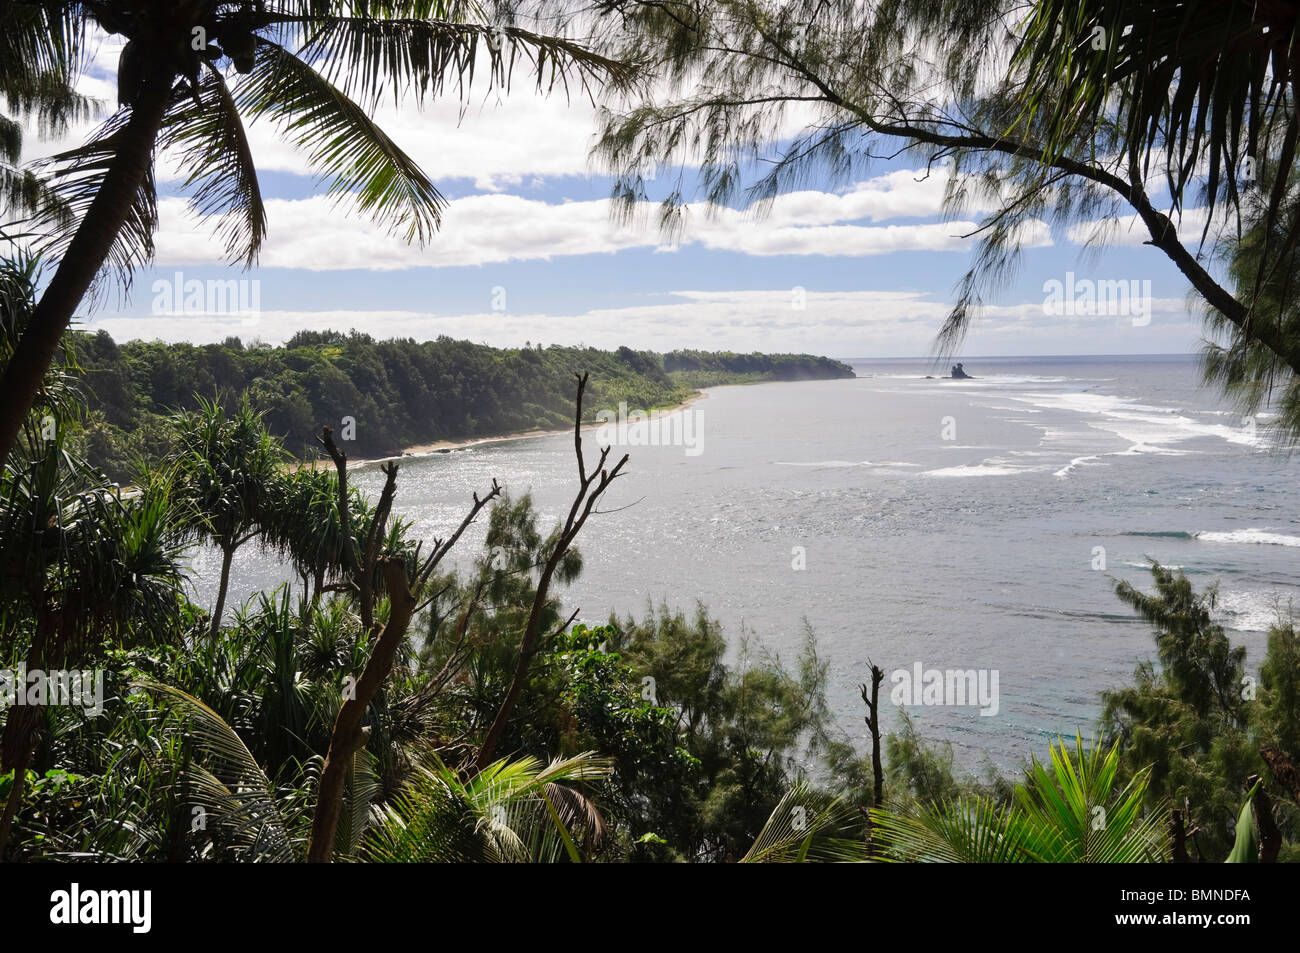 Tropical scenery: South Pacific island jungle and seascape Stock Photo